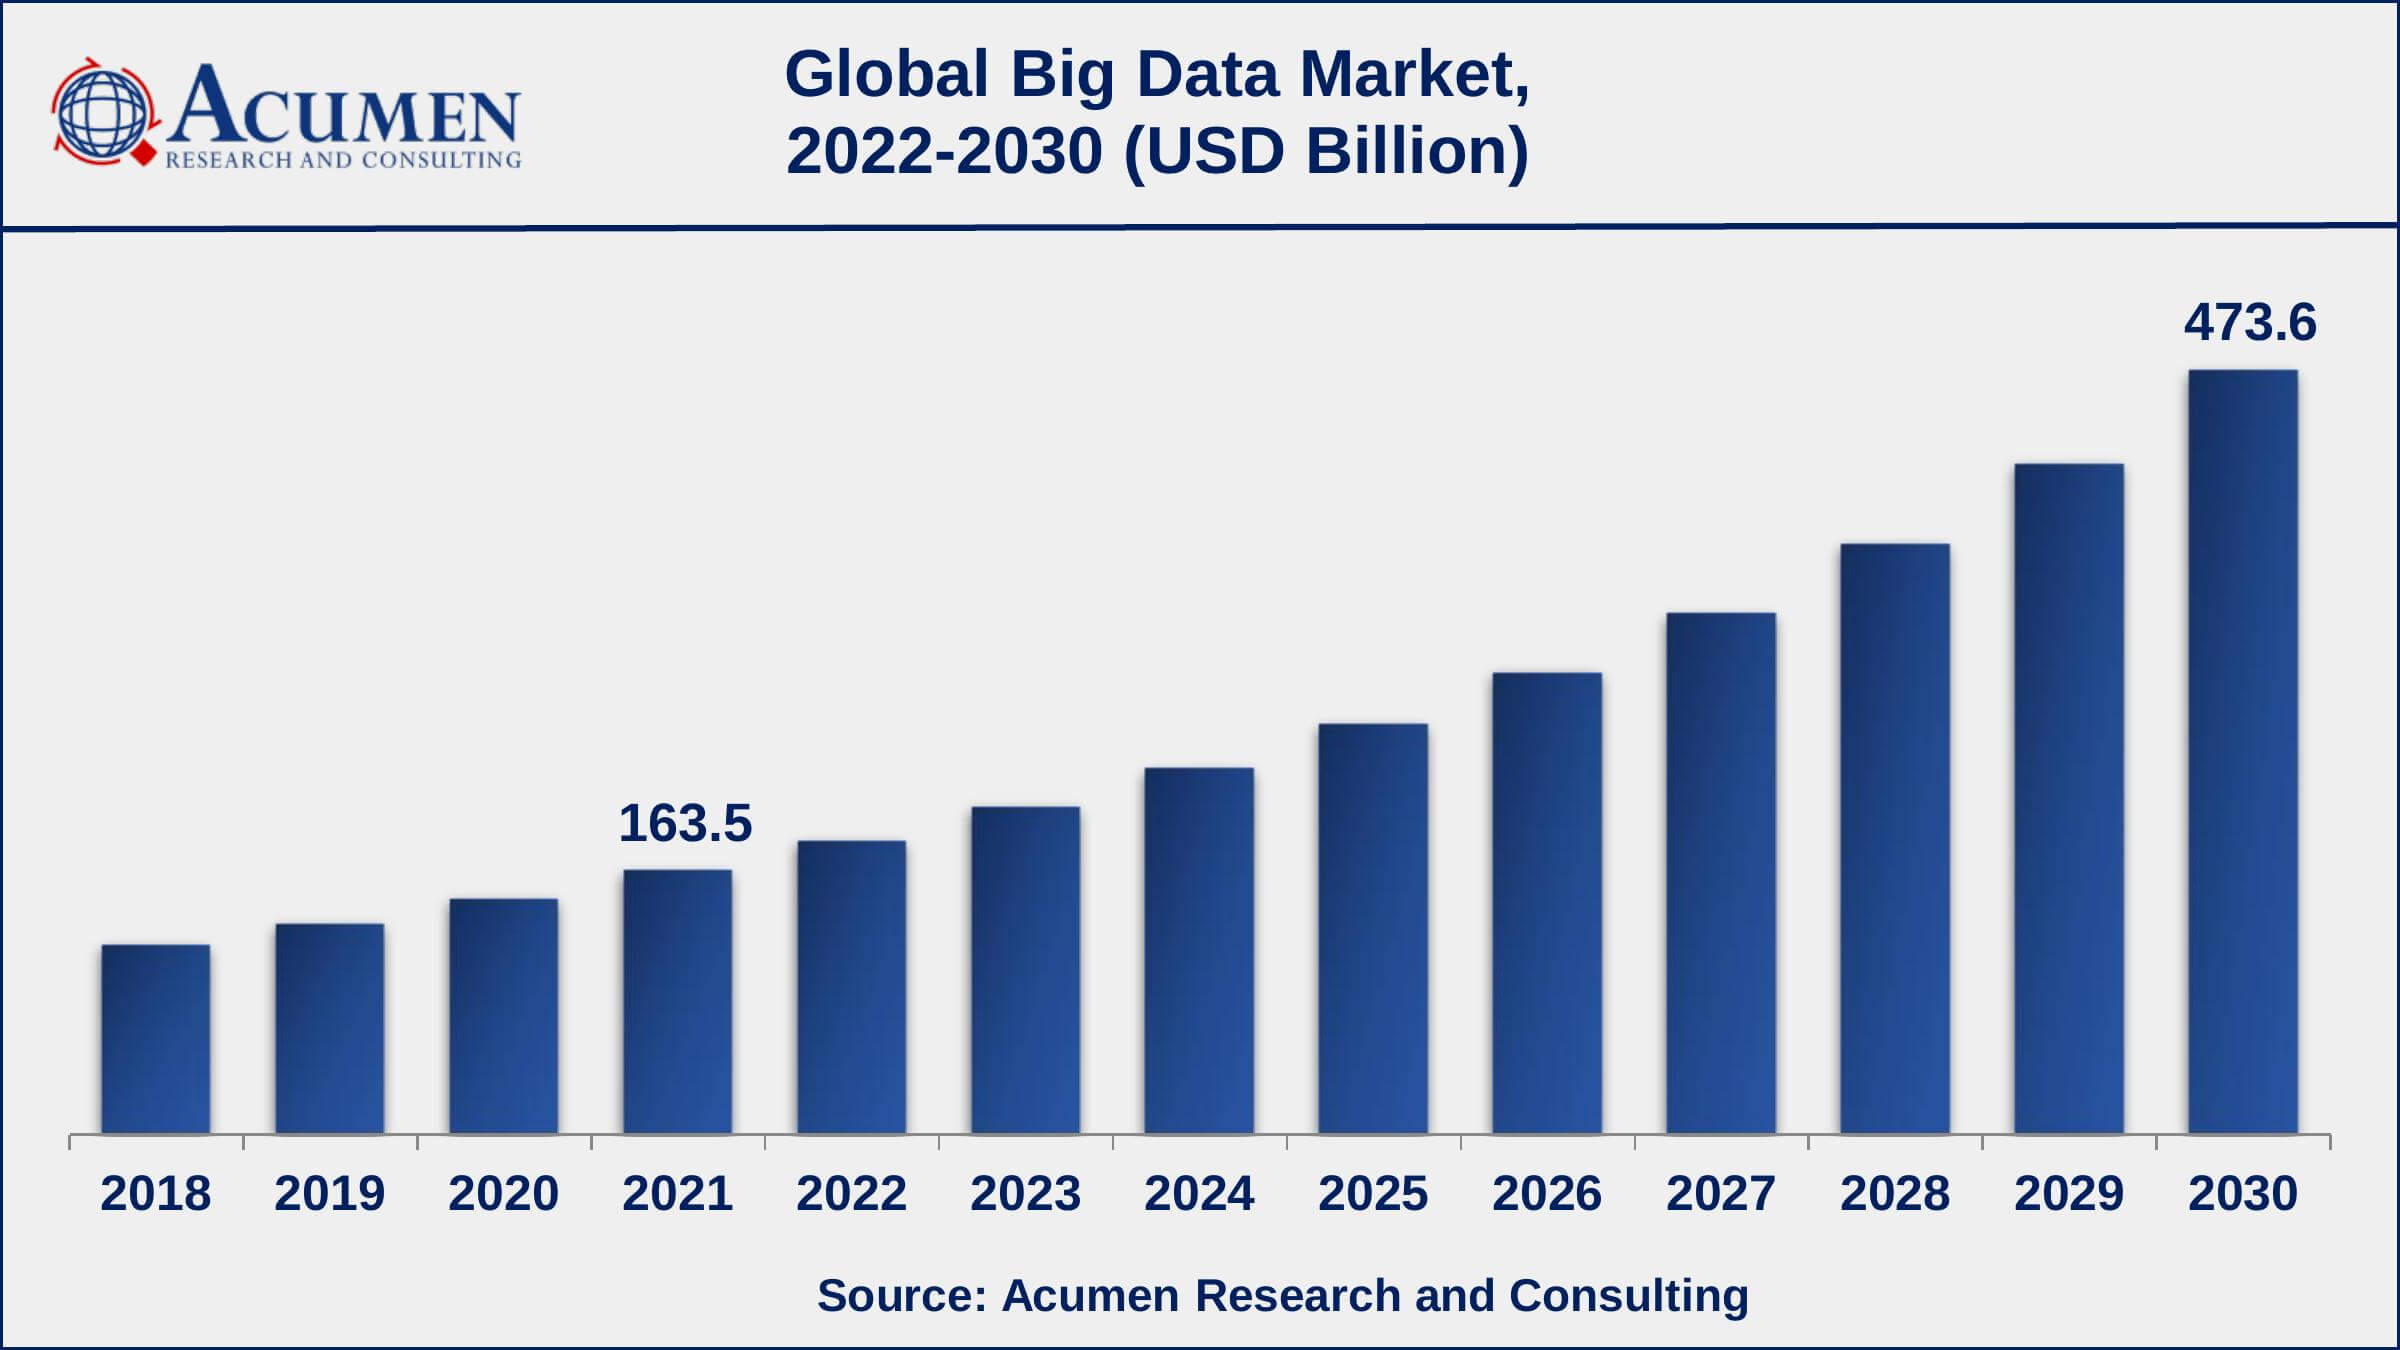 Asia-Pacific big data market growth will record CAGR of around 14% from 2022 to 2030